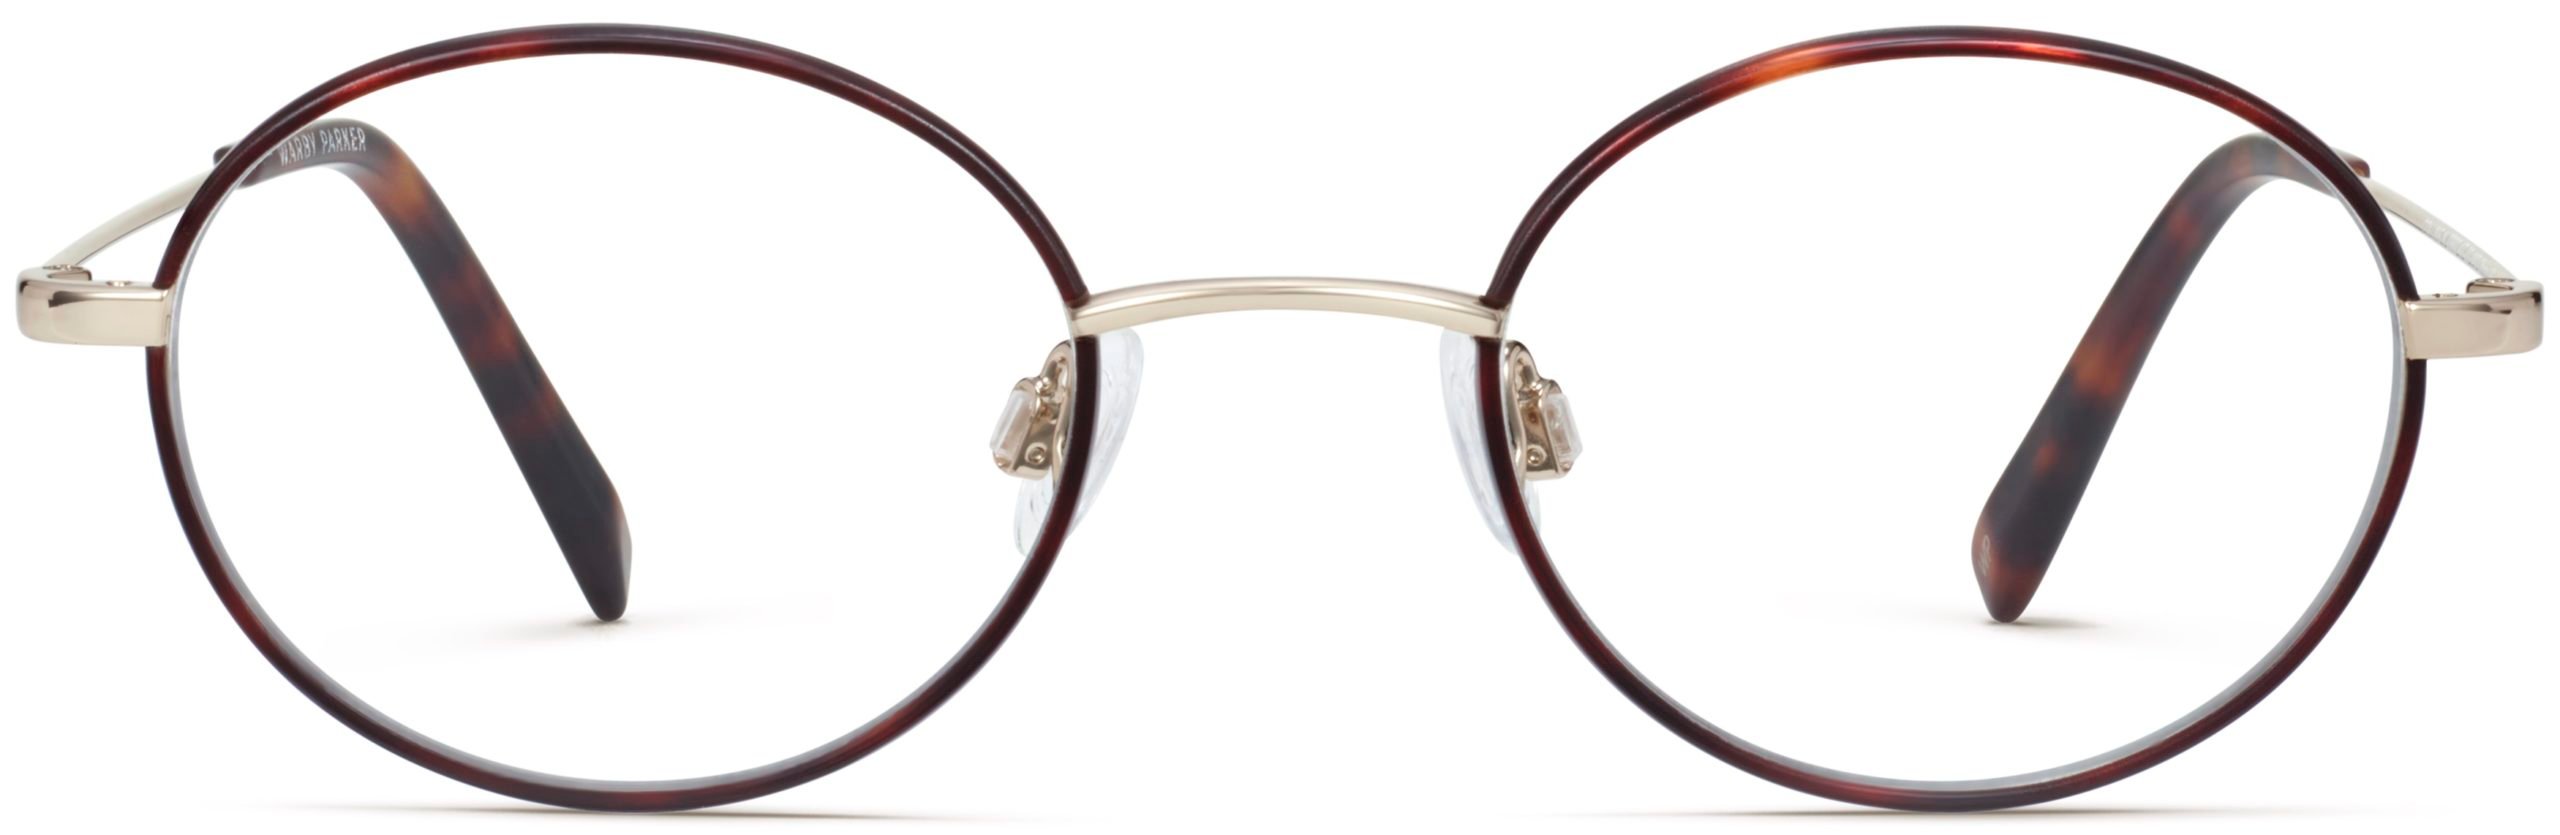 Collins glasses in red canyon matte with polished gold